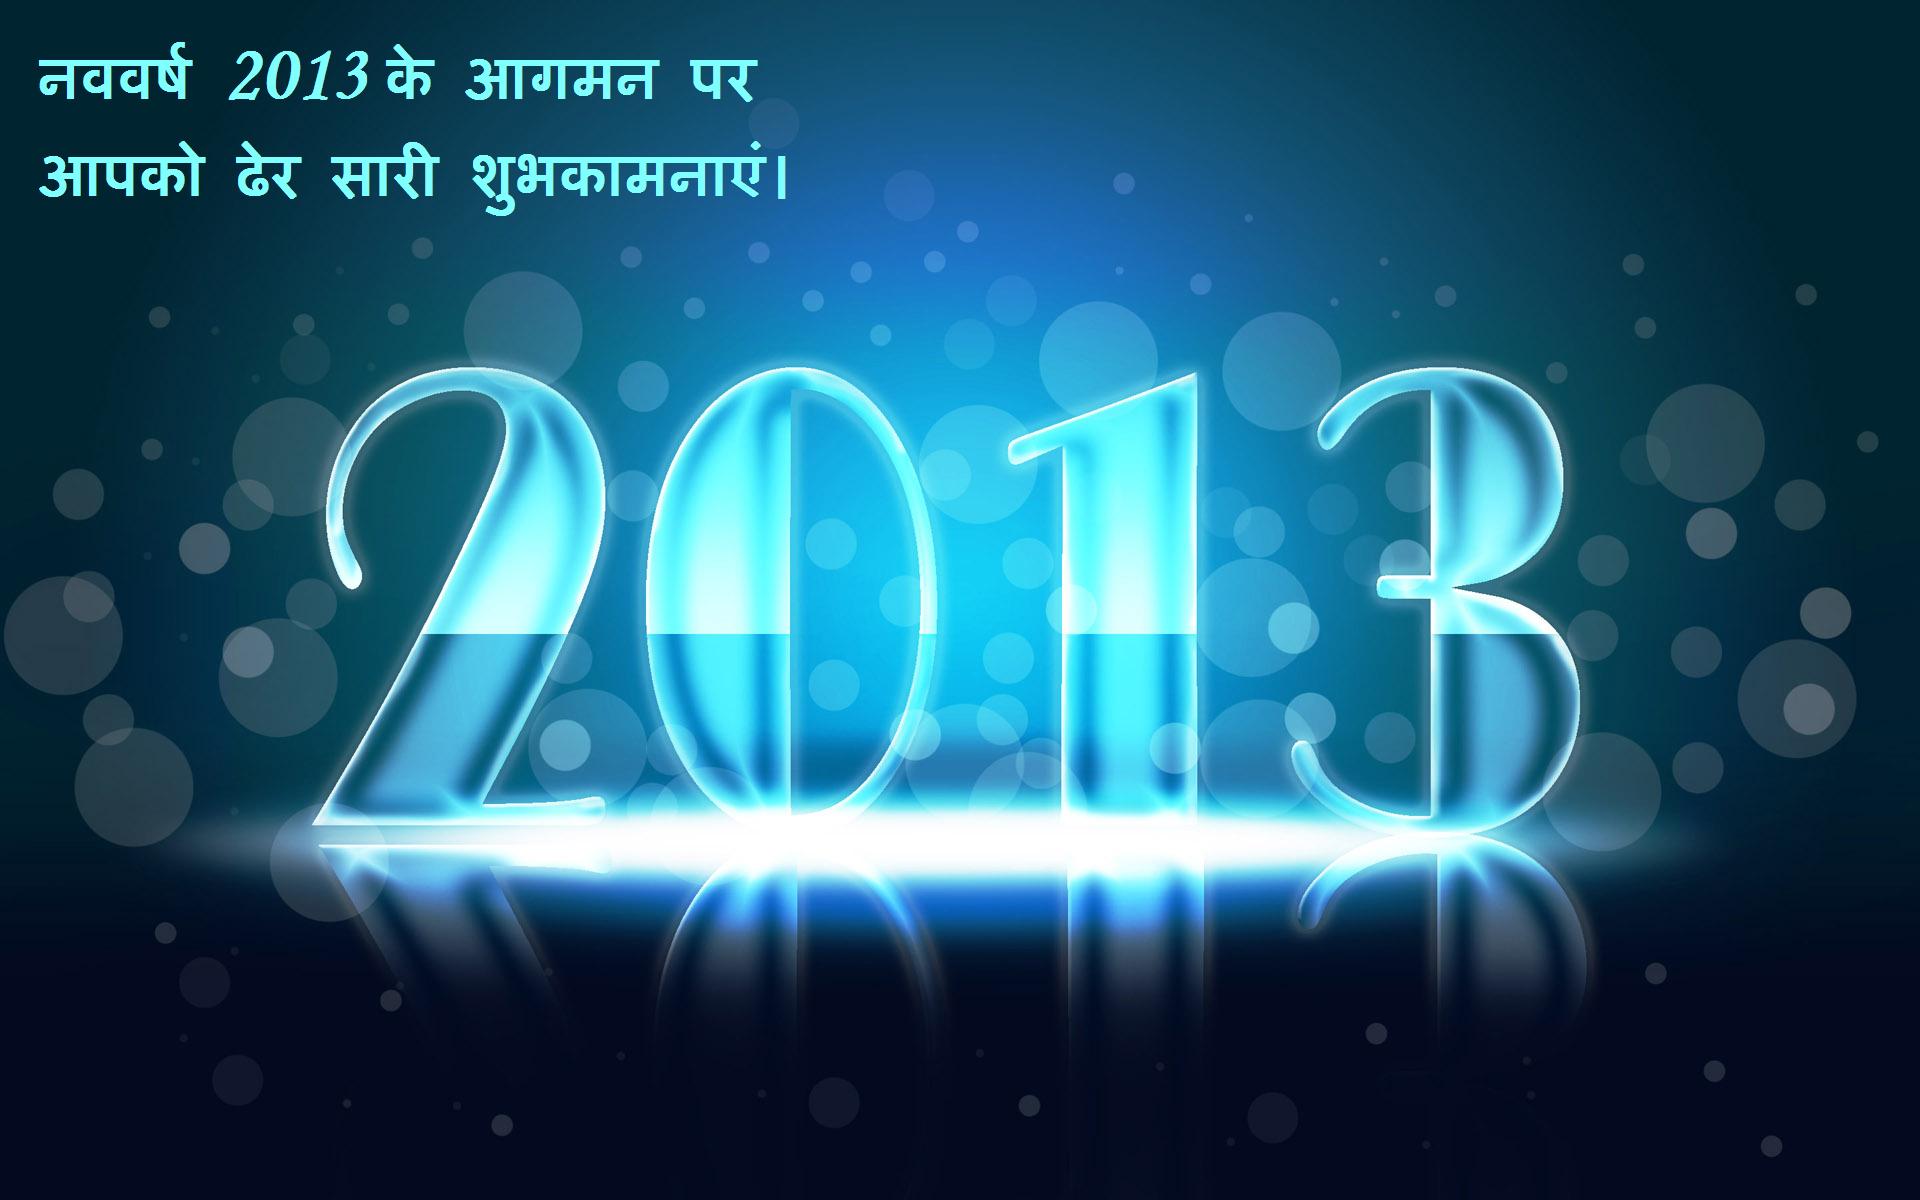 New Year Greeting Cards 2013 In Hindi